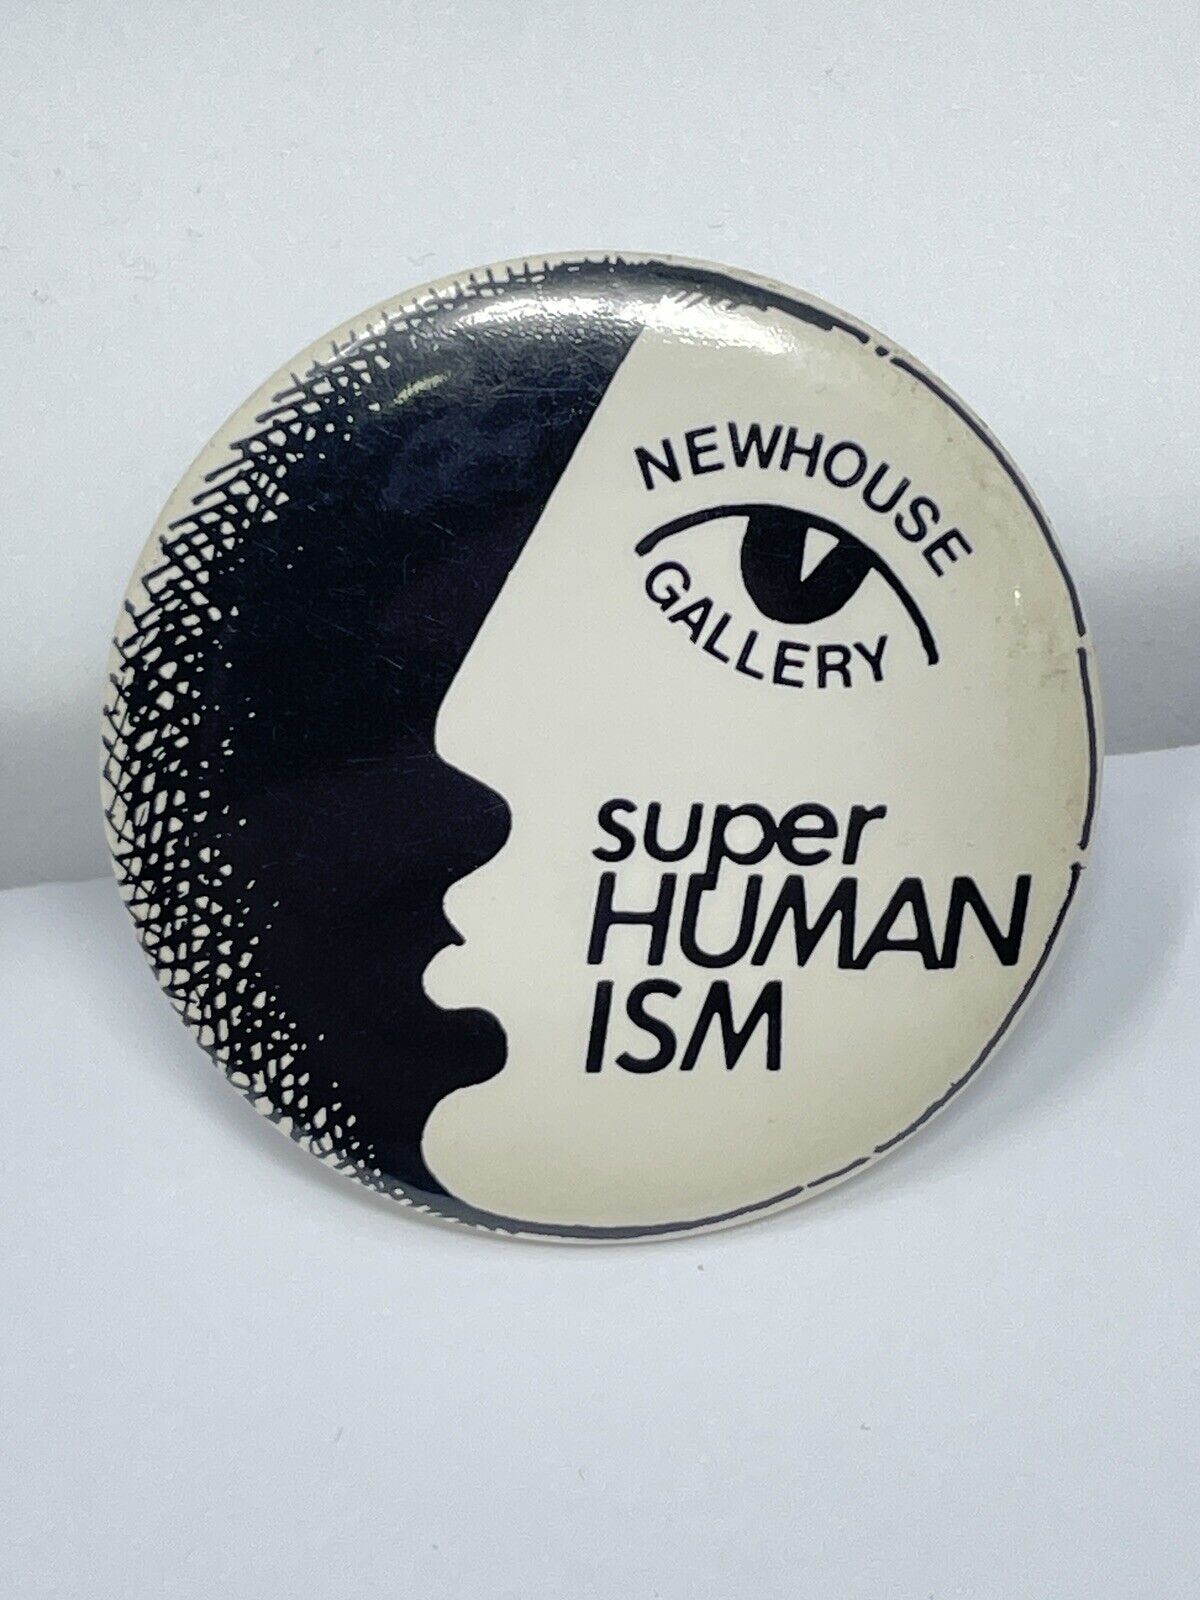 Rare Early 1980s NYC Art Show Pinback Button - Superhumanism - Newhouse Gallery